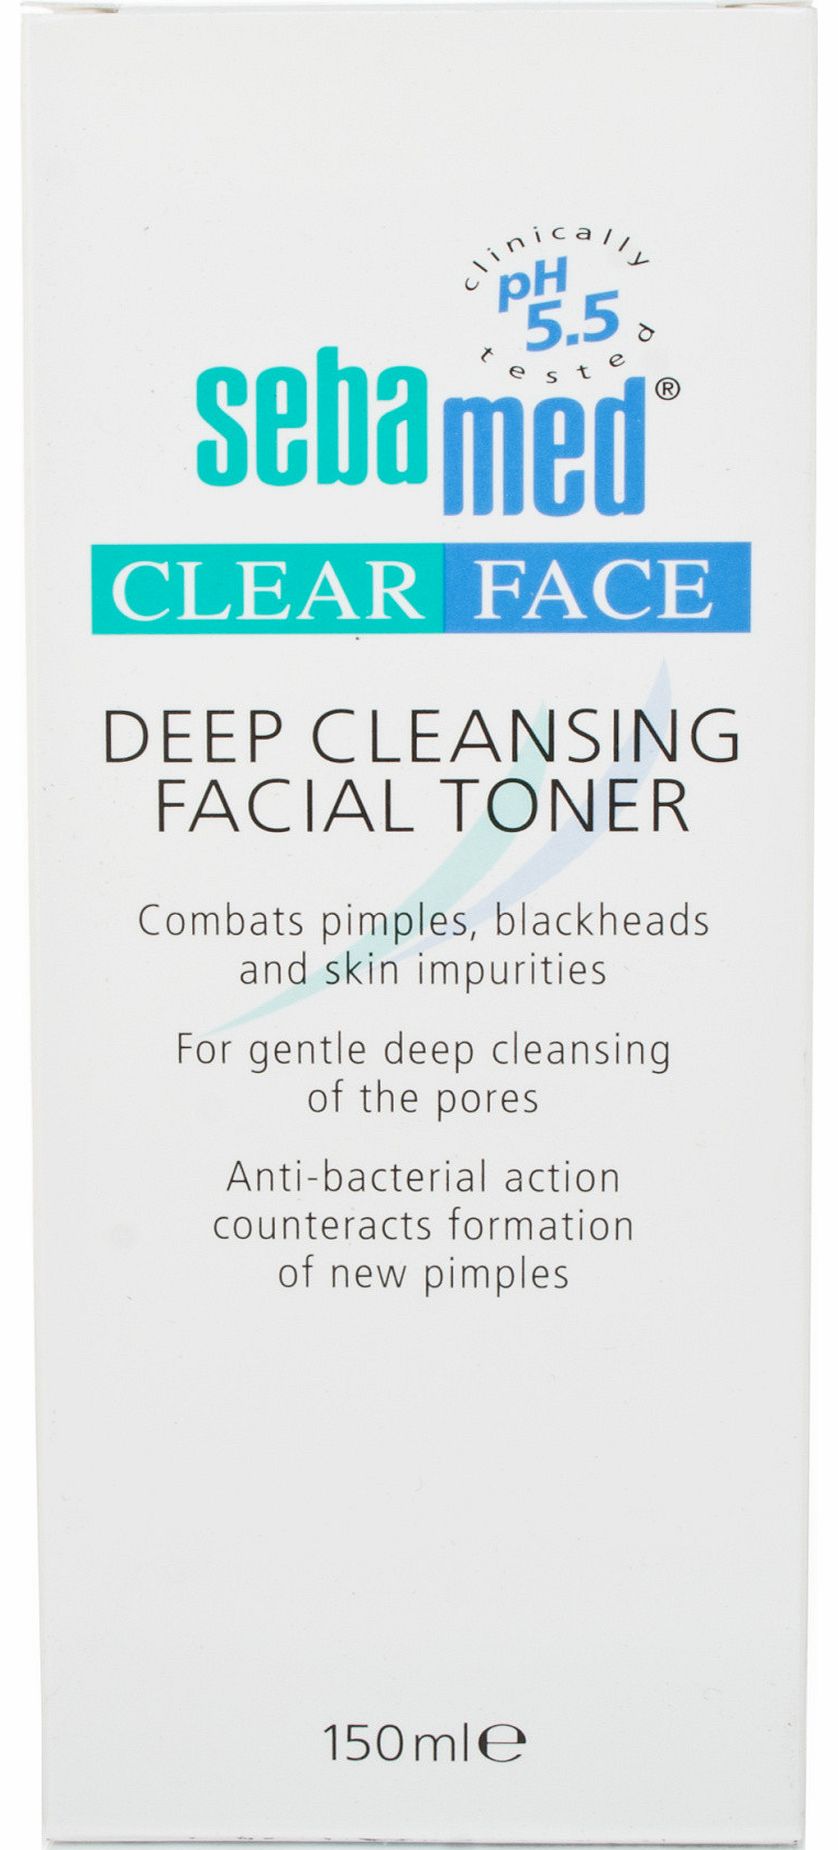 Clear Face Deep Cleansing Facial Toner